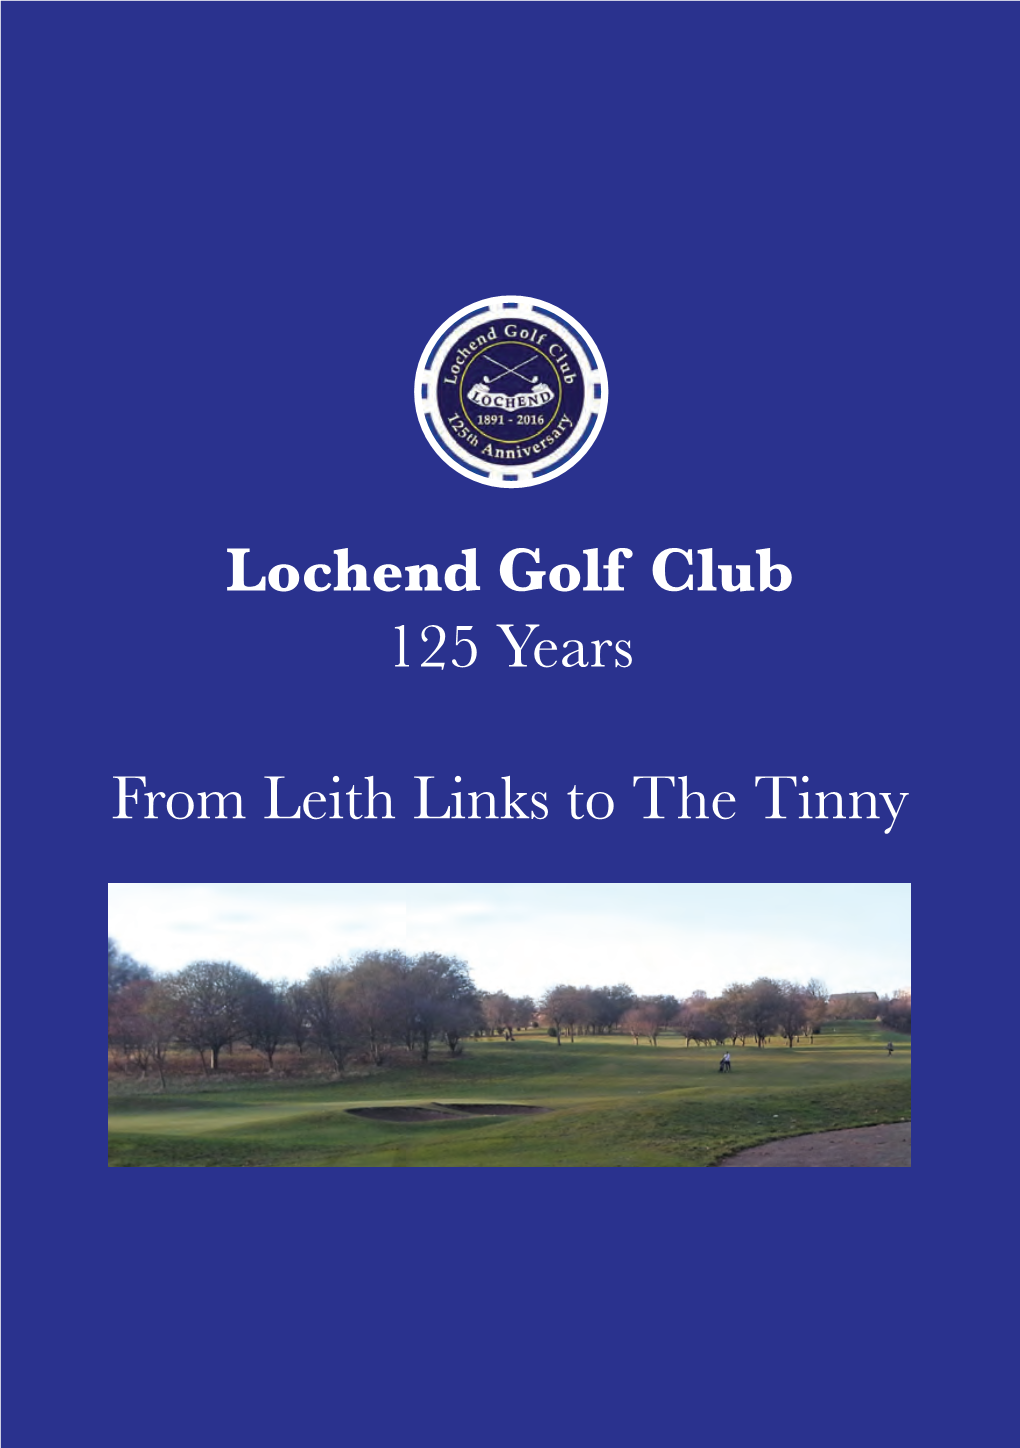 Lochend Golf Club 125 Years from Leith Links to the Tinny